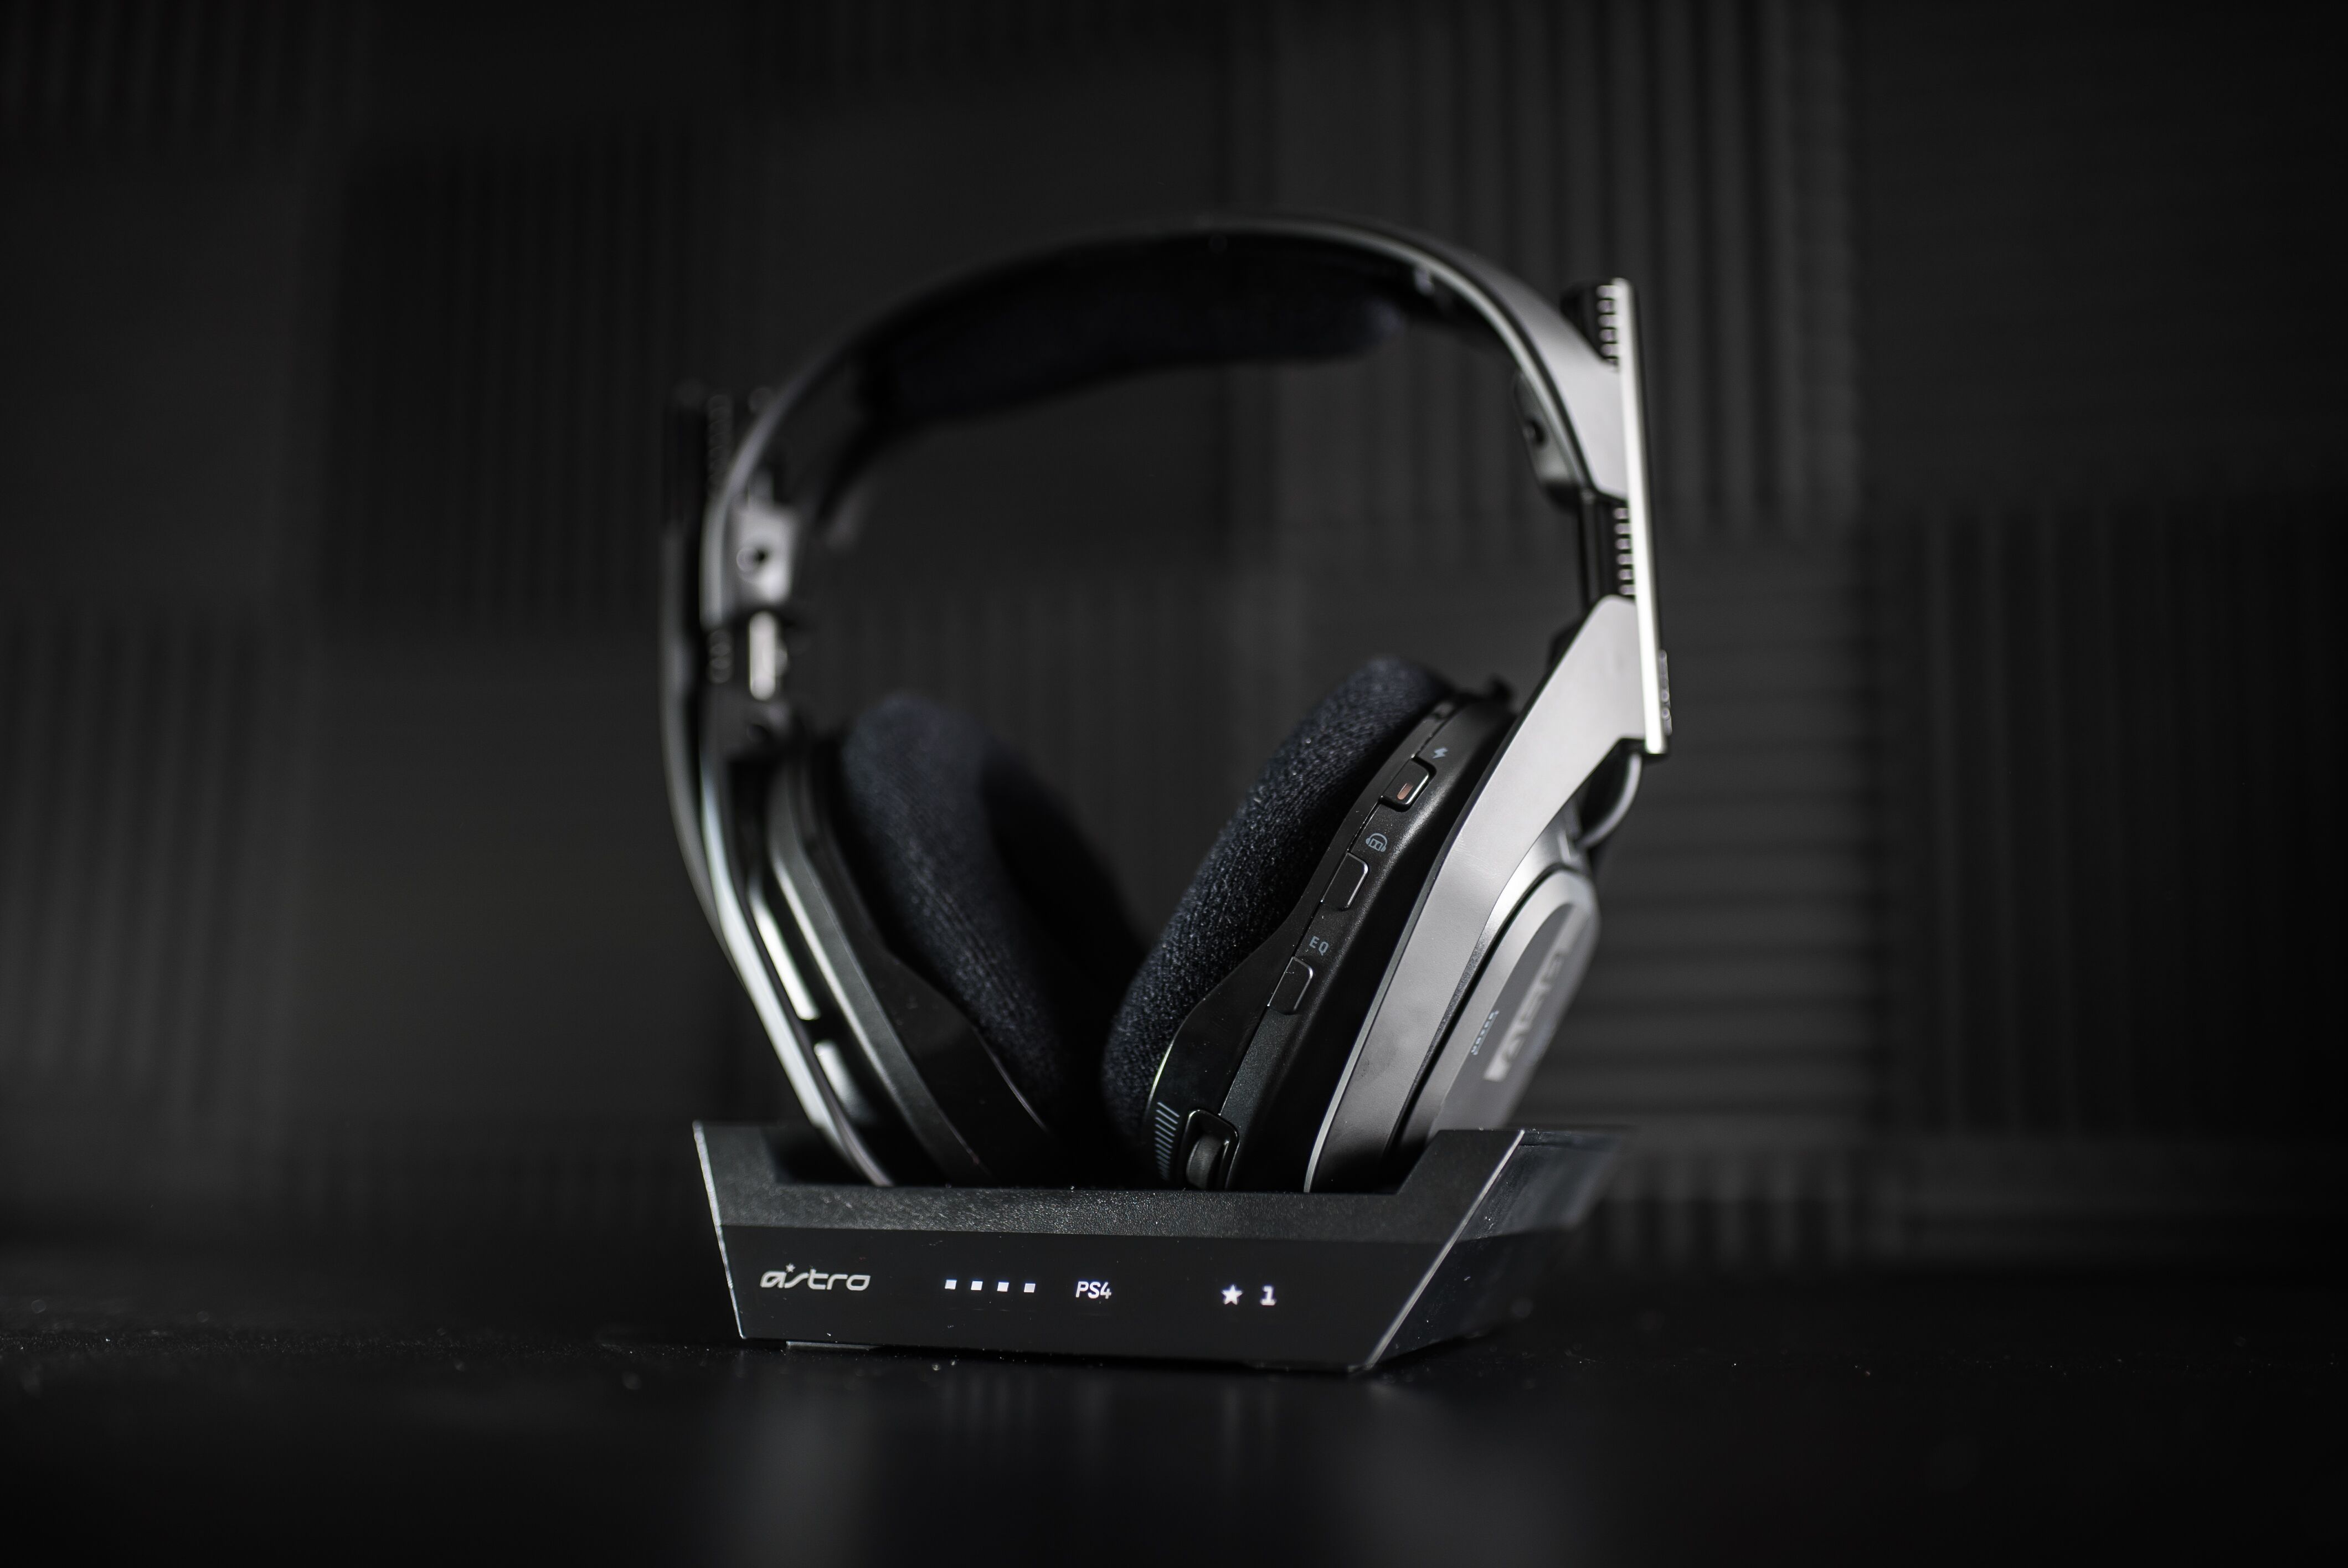 Astro A50 headset gaming headset